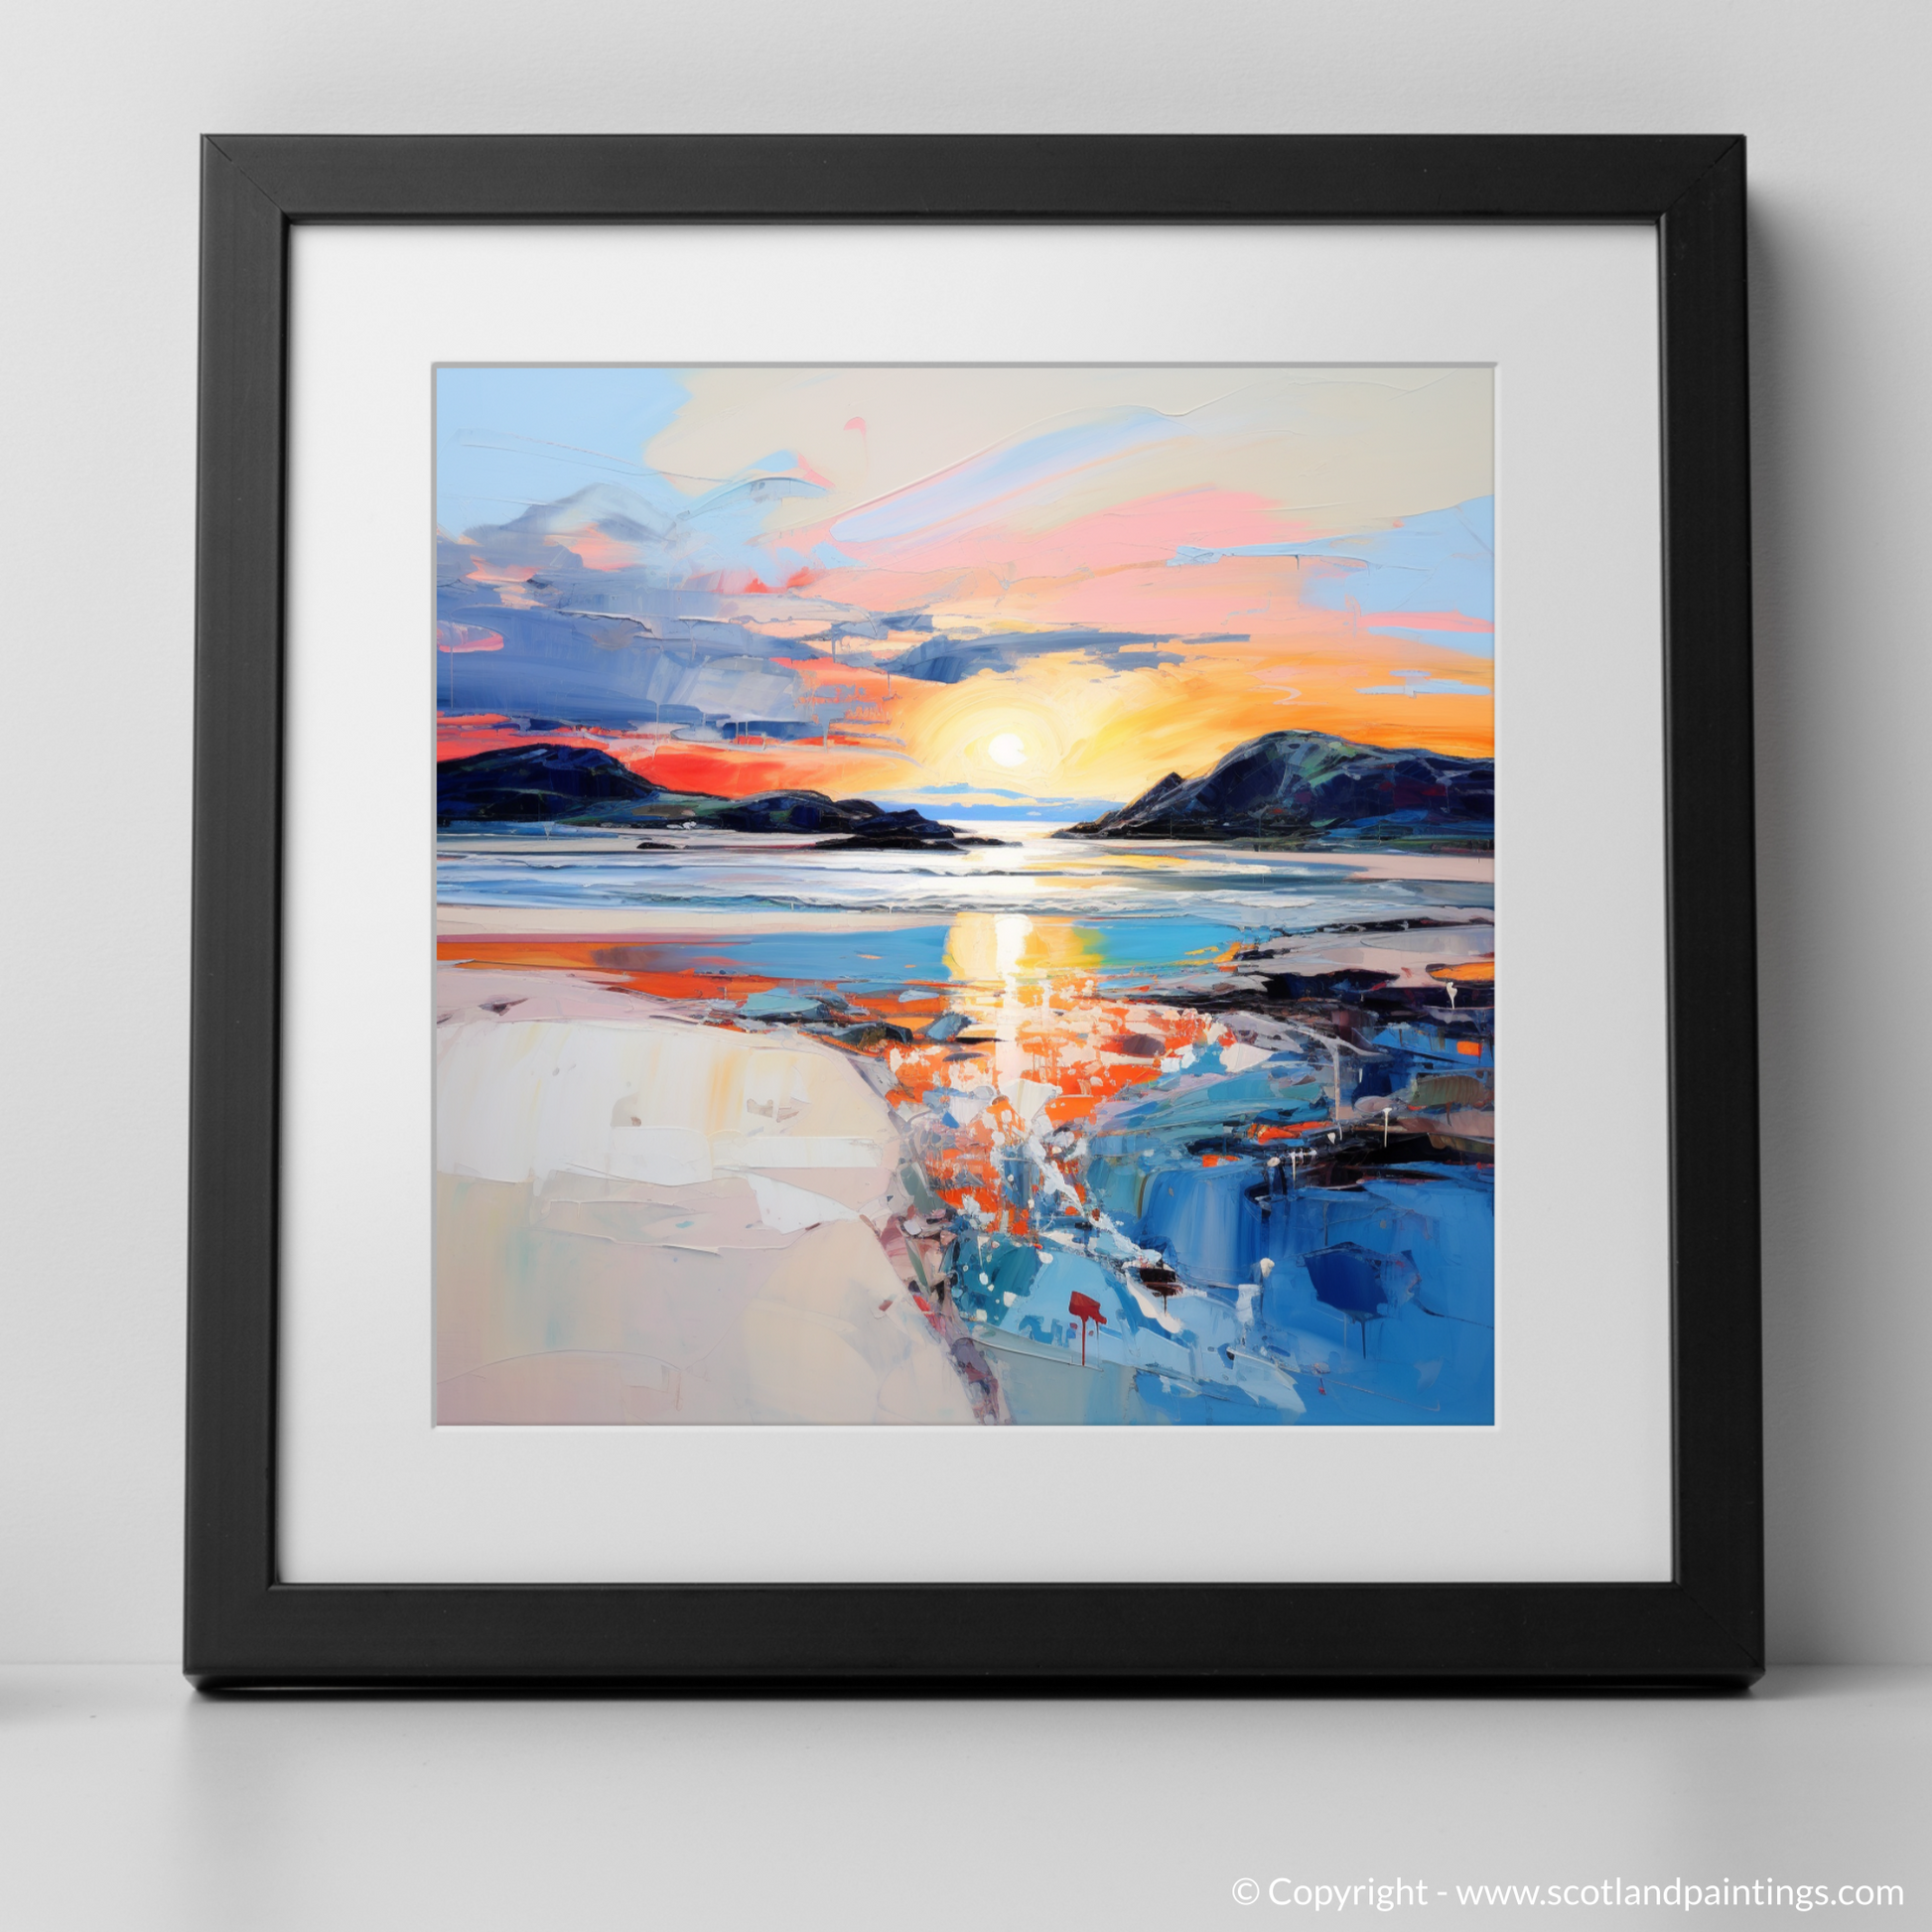 Art Print of Traigh Mhor at sunset with a black frame